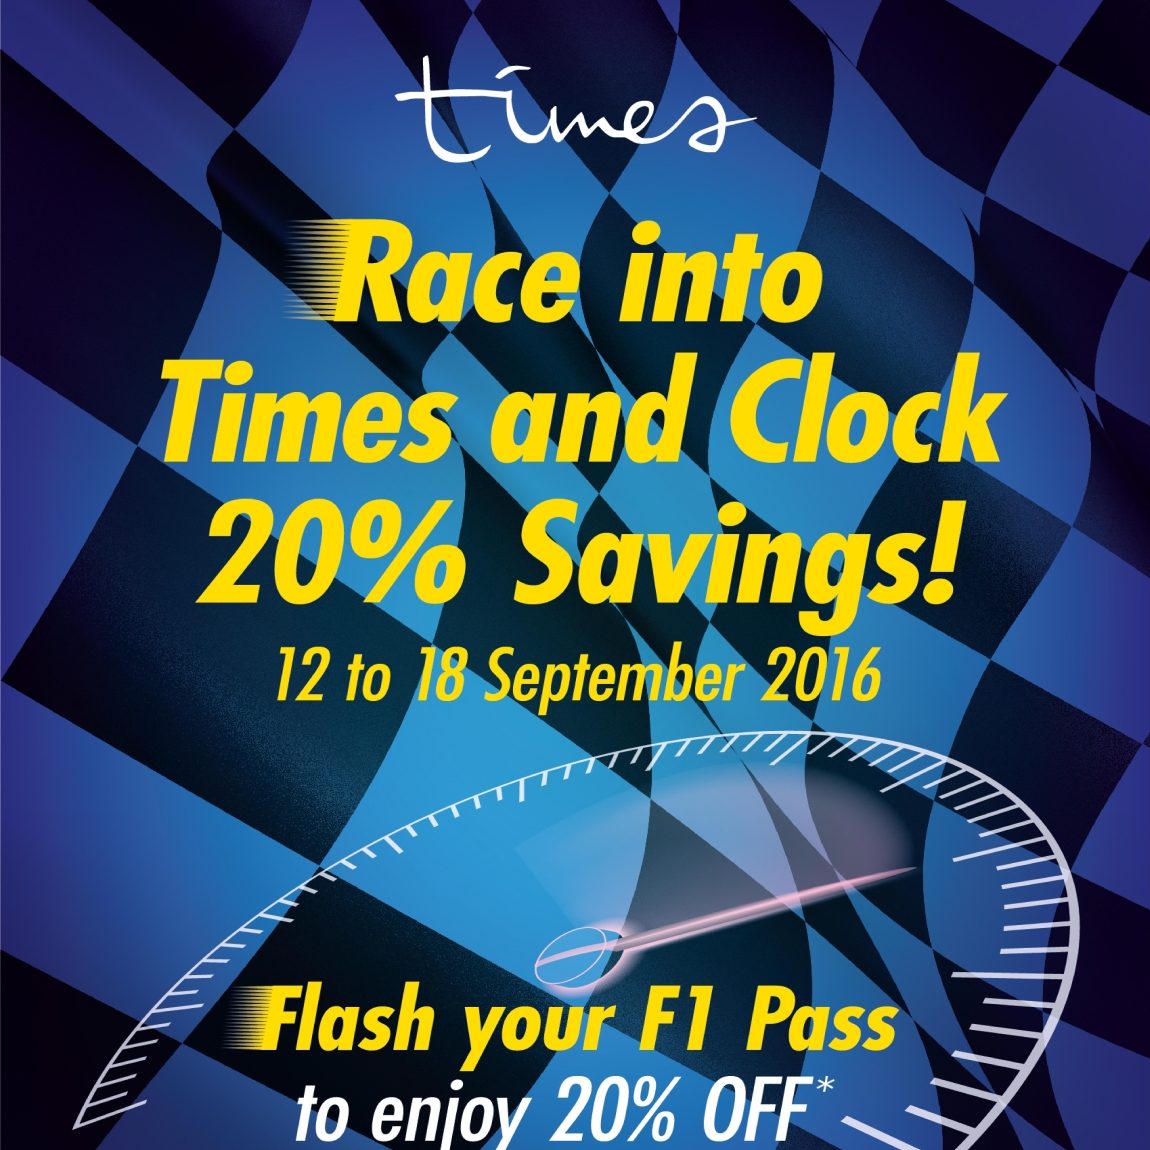 Times Bookstores Singapore Flash F1 Pass & Get 20% Off Promotion 12 to 18 Sep 2016